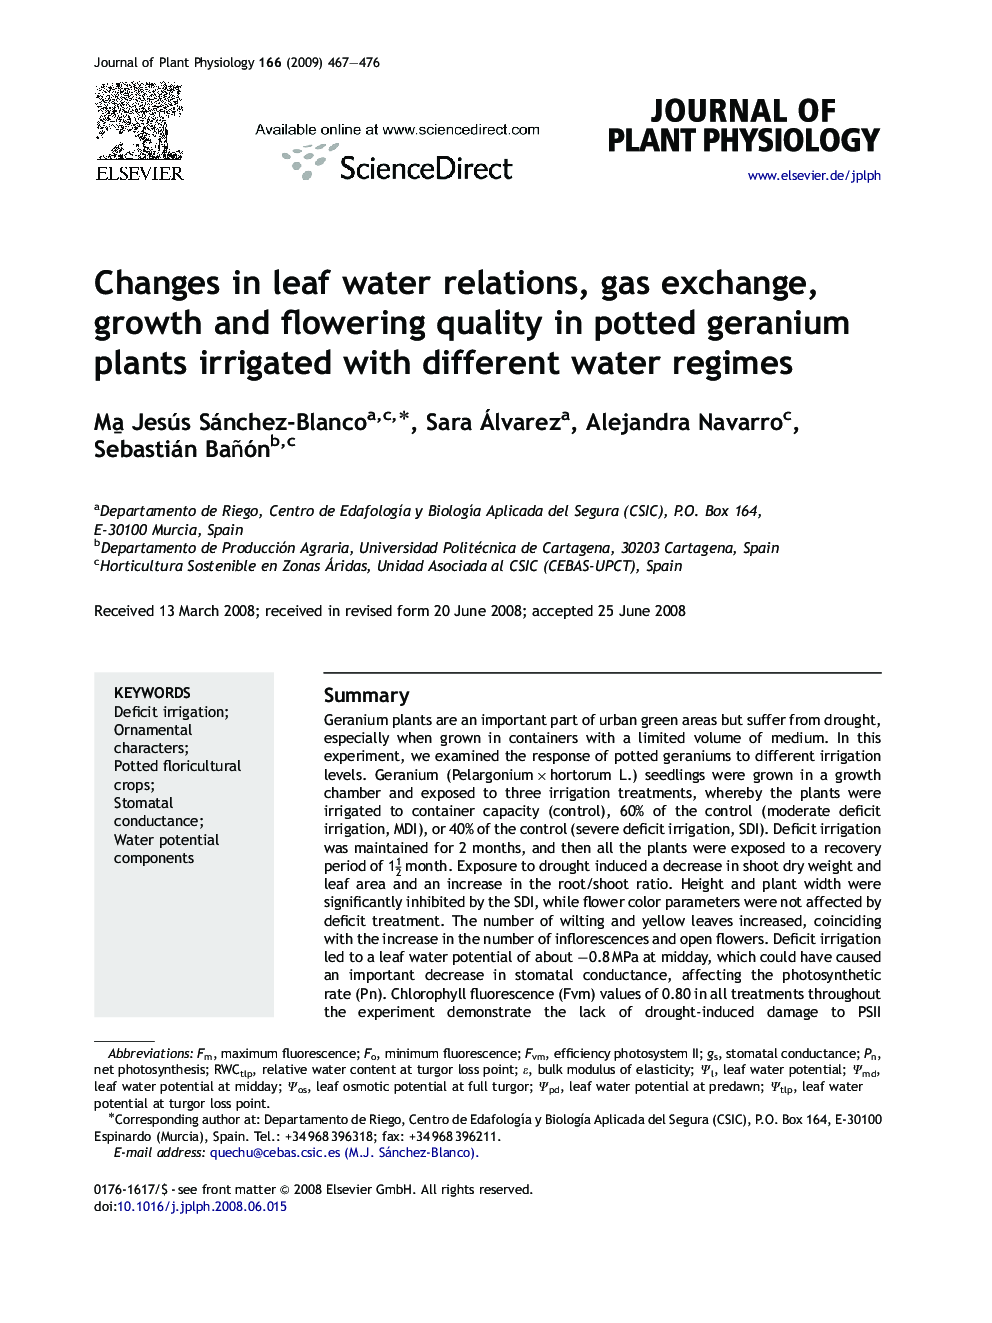 Changes in leaf water relations, gas exchange, growth and flowering quality in potted geranium plants irrigated with different water regimes